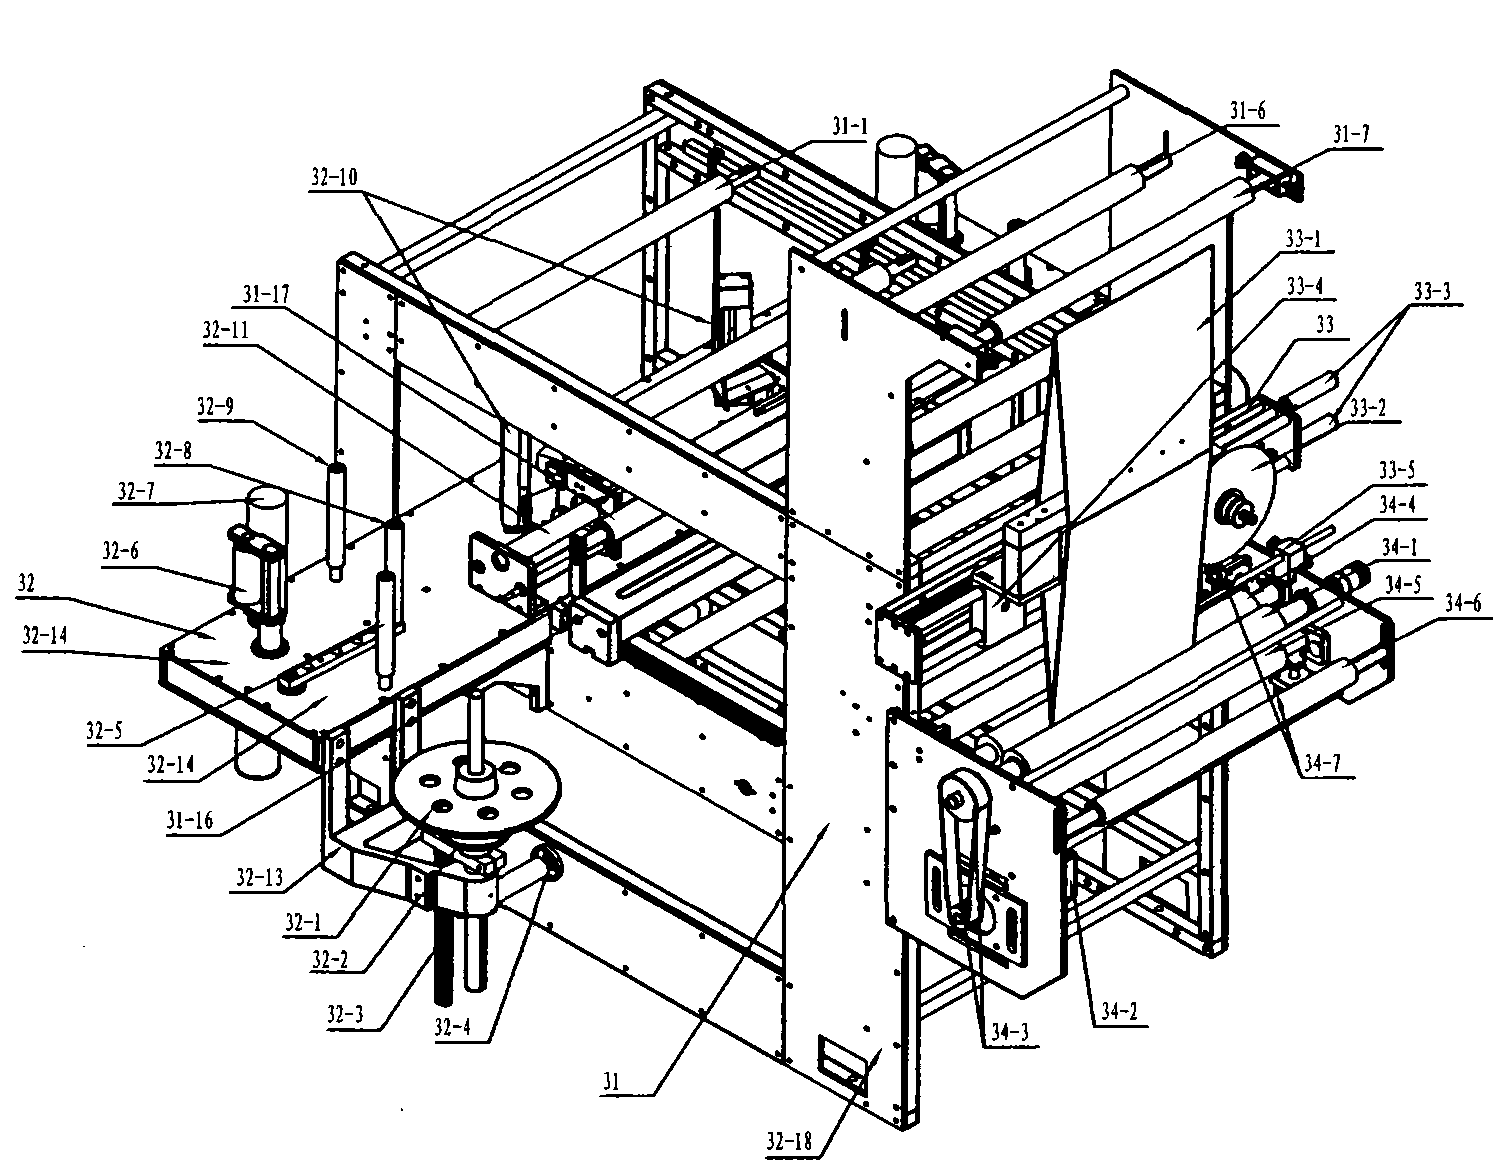 Self-standing device for full-automatic multifunctional multi-system integrated bag-making machine